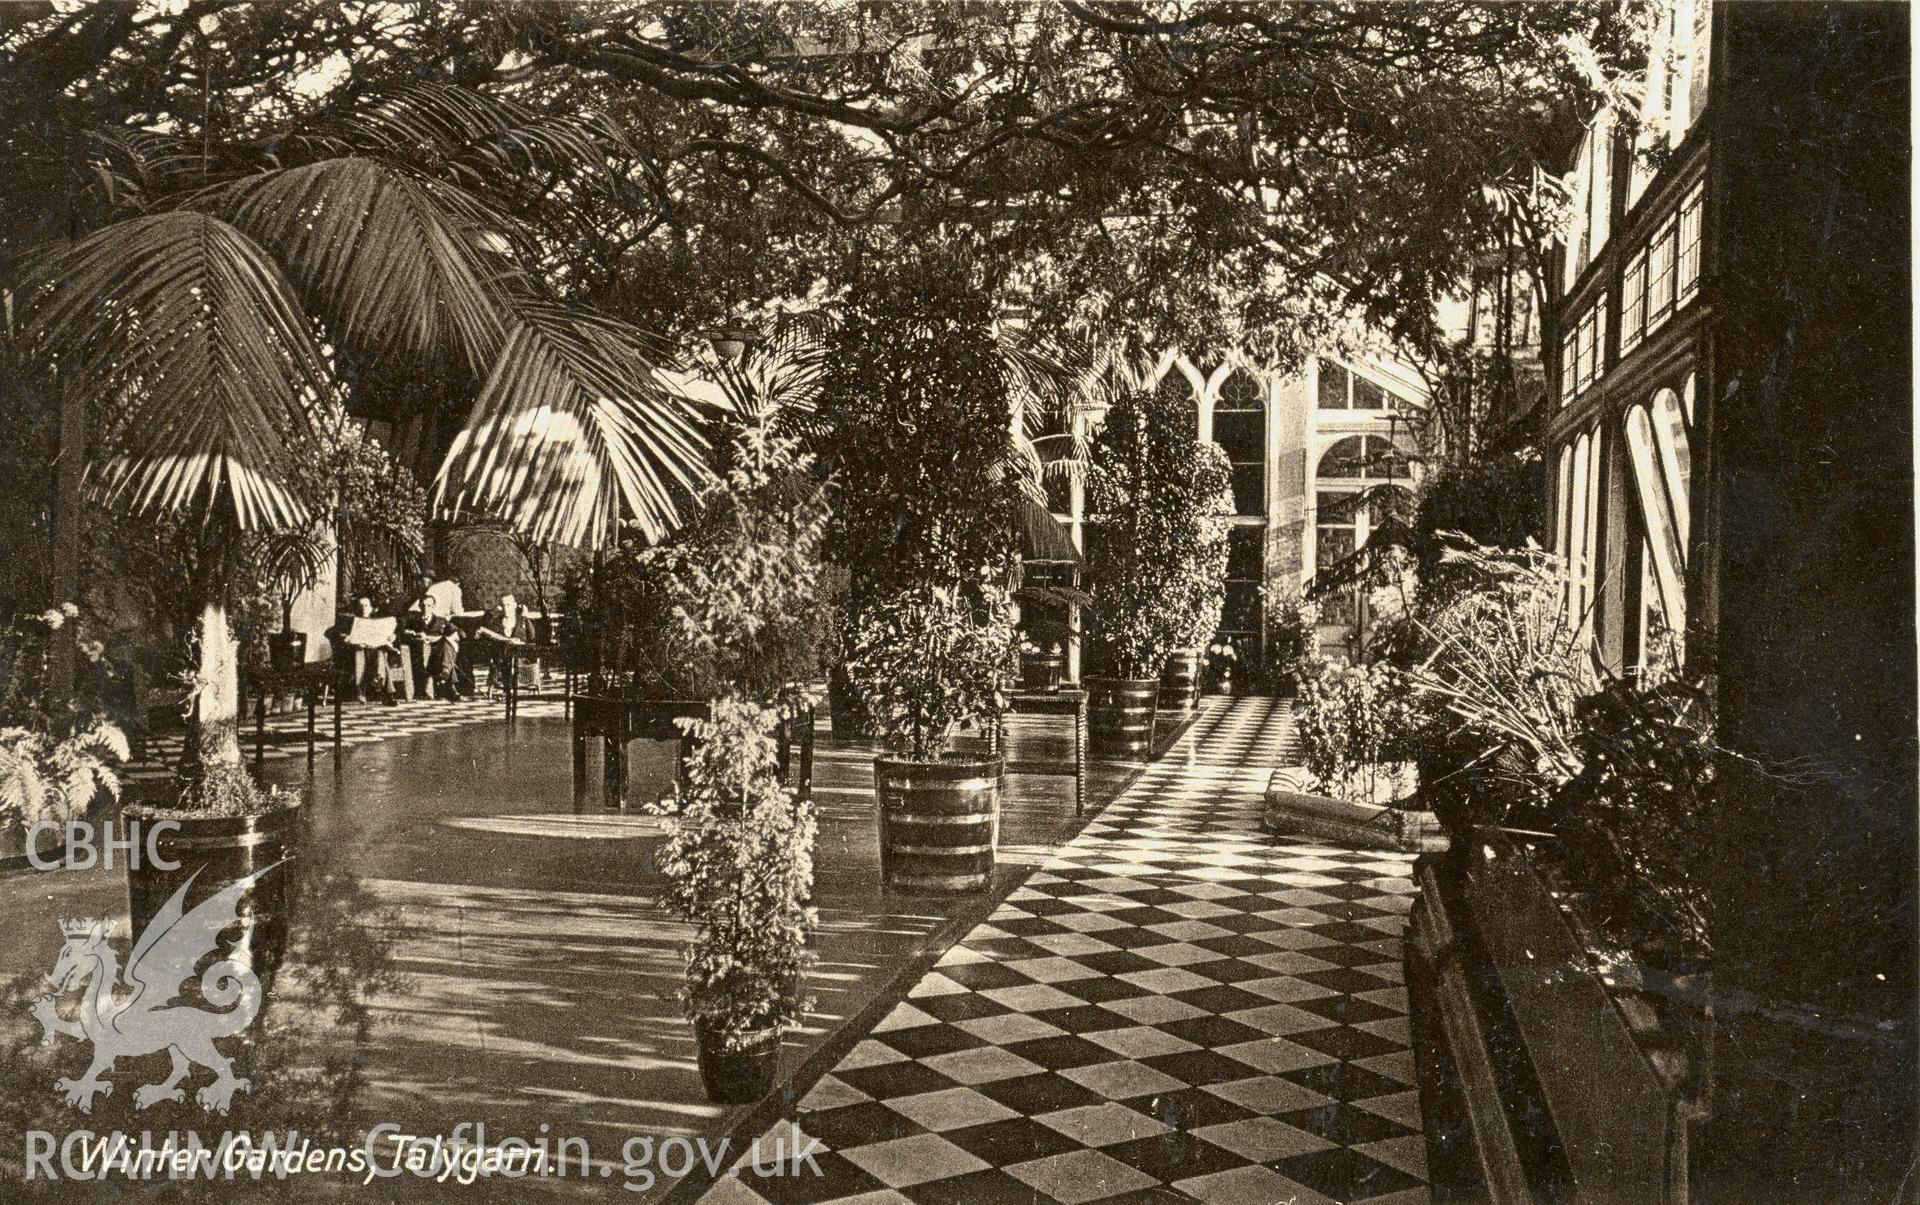 Digitised postcard image of interior of Winter Gardens, Talygarn, Pont-y-Clun, The R.A.P. Co. Ltd., London. Produced by Parks and Gardens Data Services, from an original item in the Peter Davis Collection at Parks and Gardens UK. We hold only web-resolution images of this collection, suitable for viewing on screen and for research purposes only. We do not hold the original images, or publication quality scans.